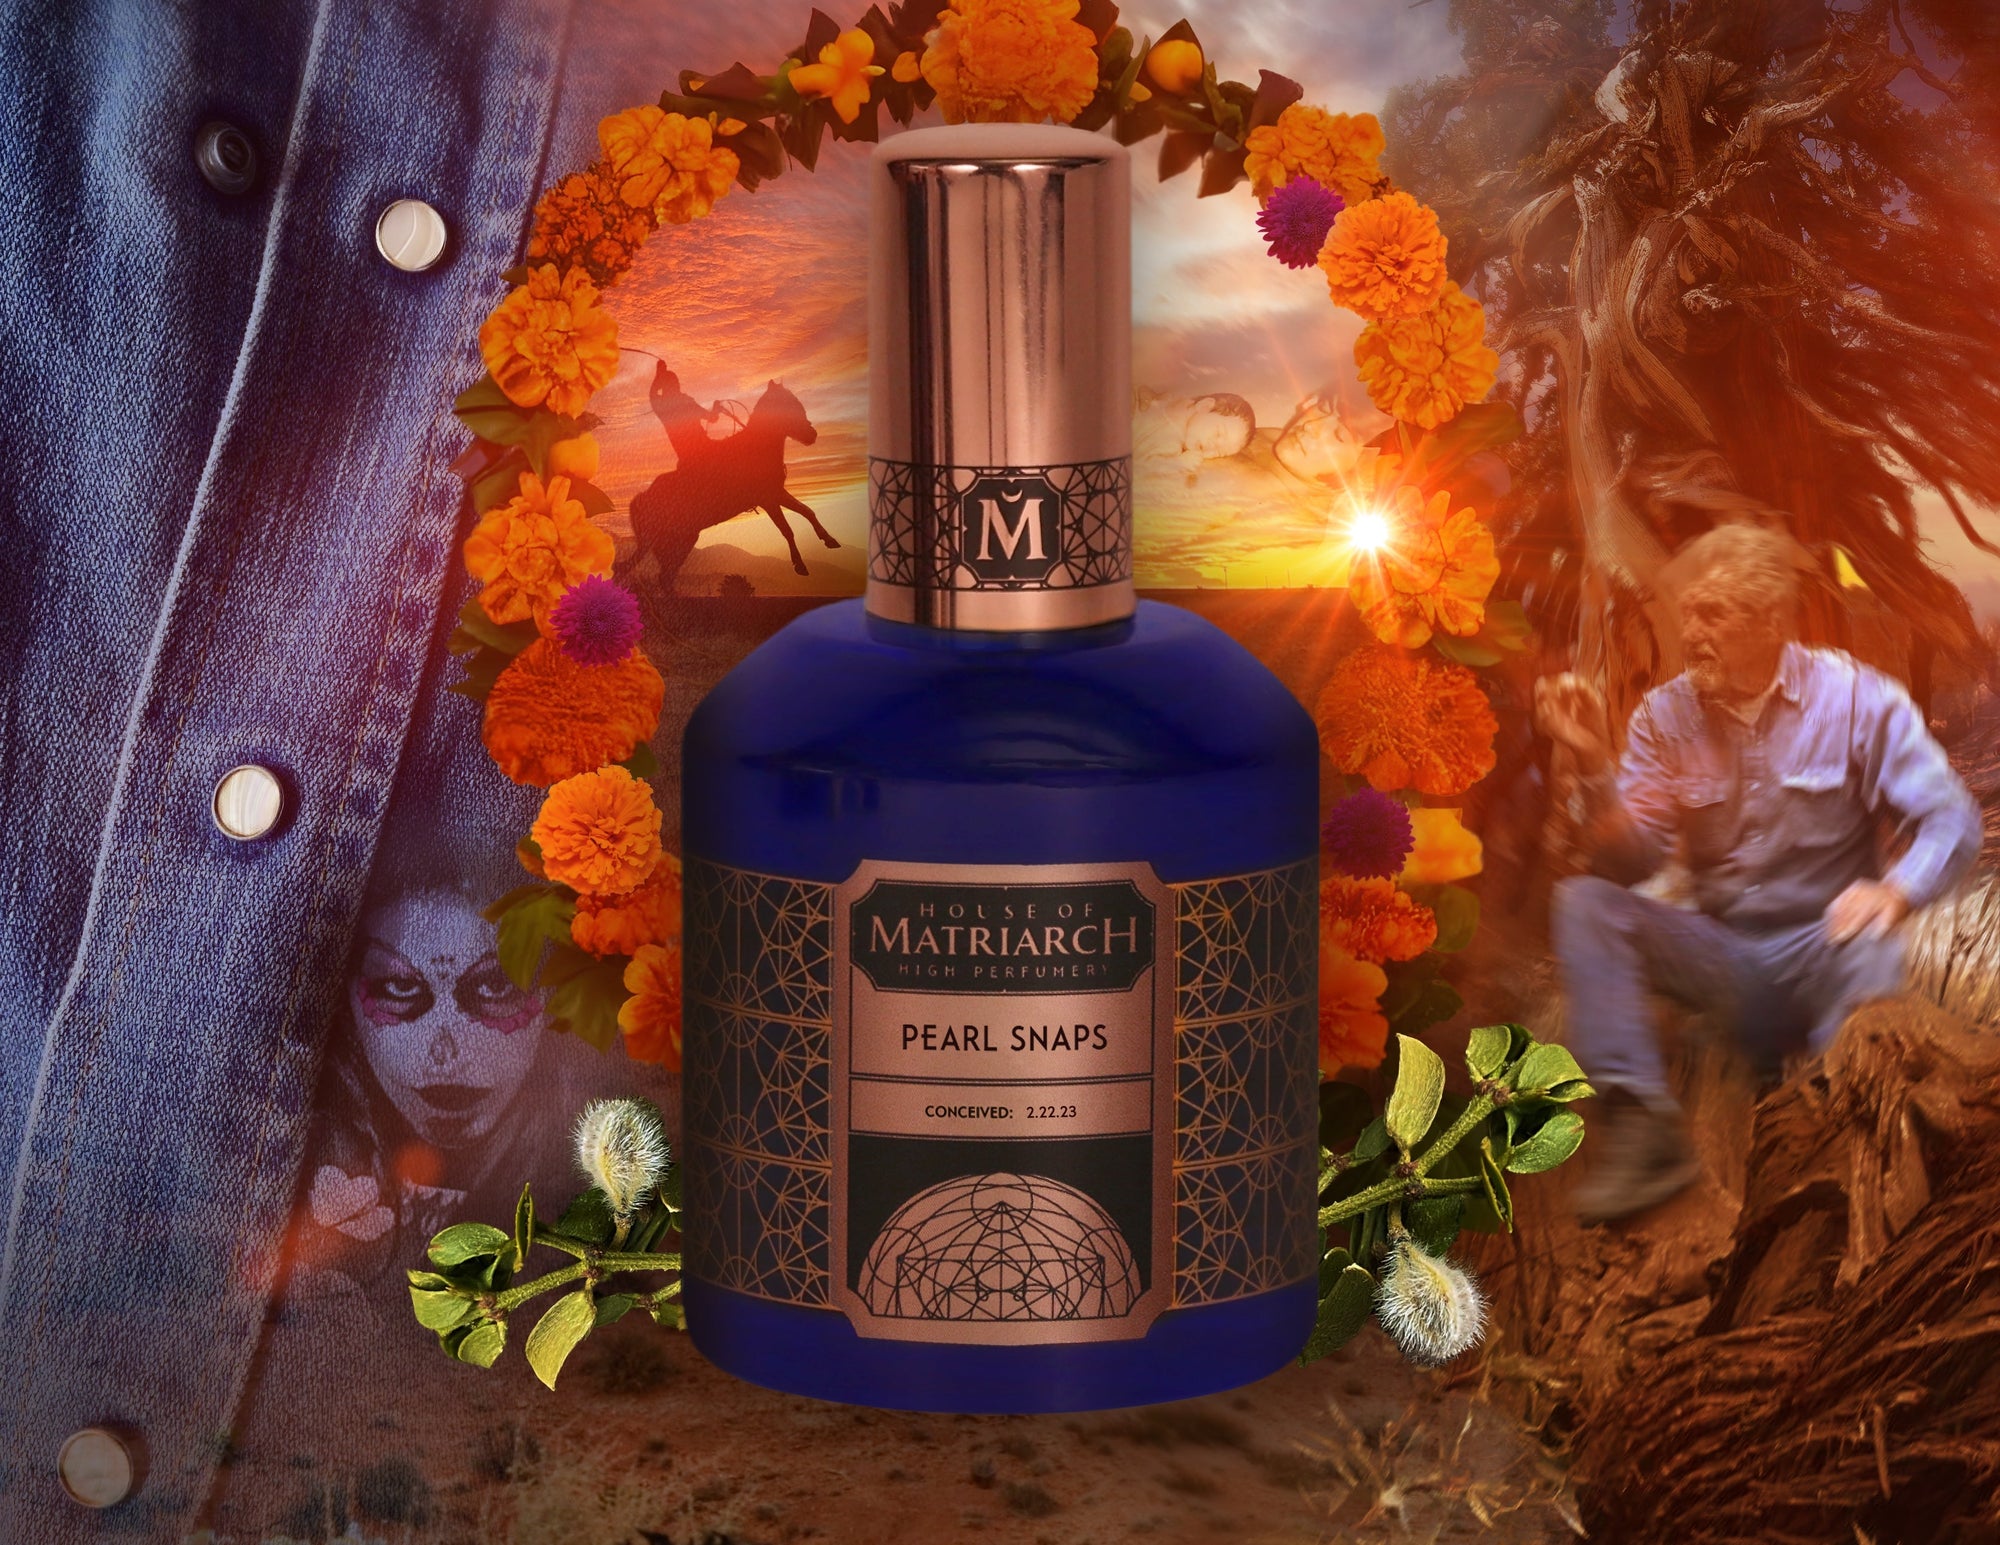 House of Matriarch - SEATTLE, WA - Natural, Organic, Vegan, Artisan & Niche High Perfumery PEARL SNAPS -  Fragrance for Real Cowboys (and dudes too)